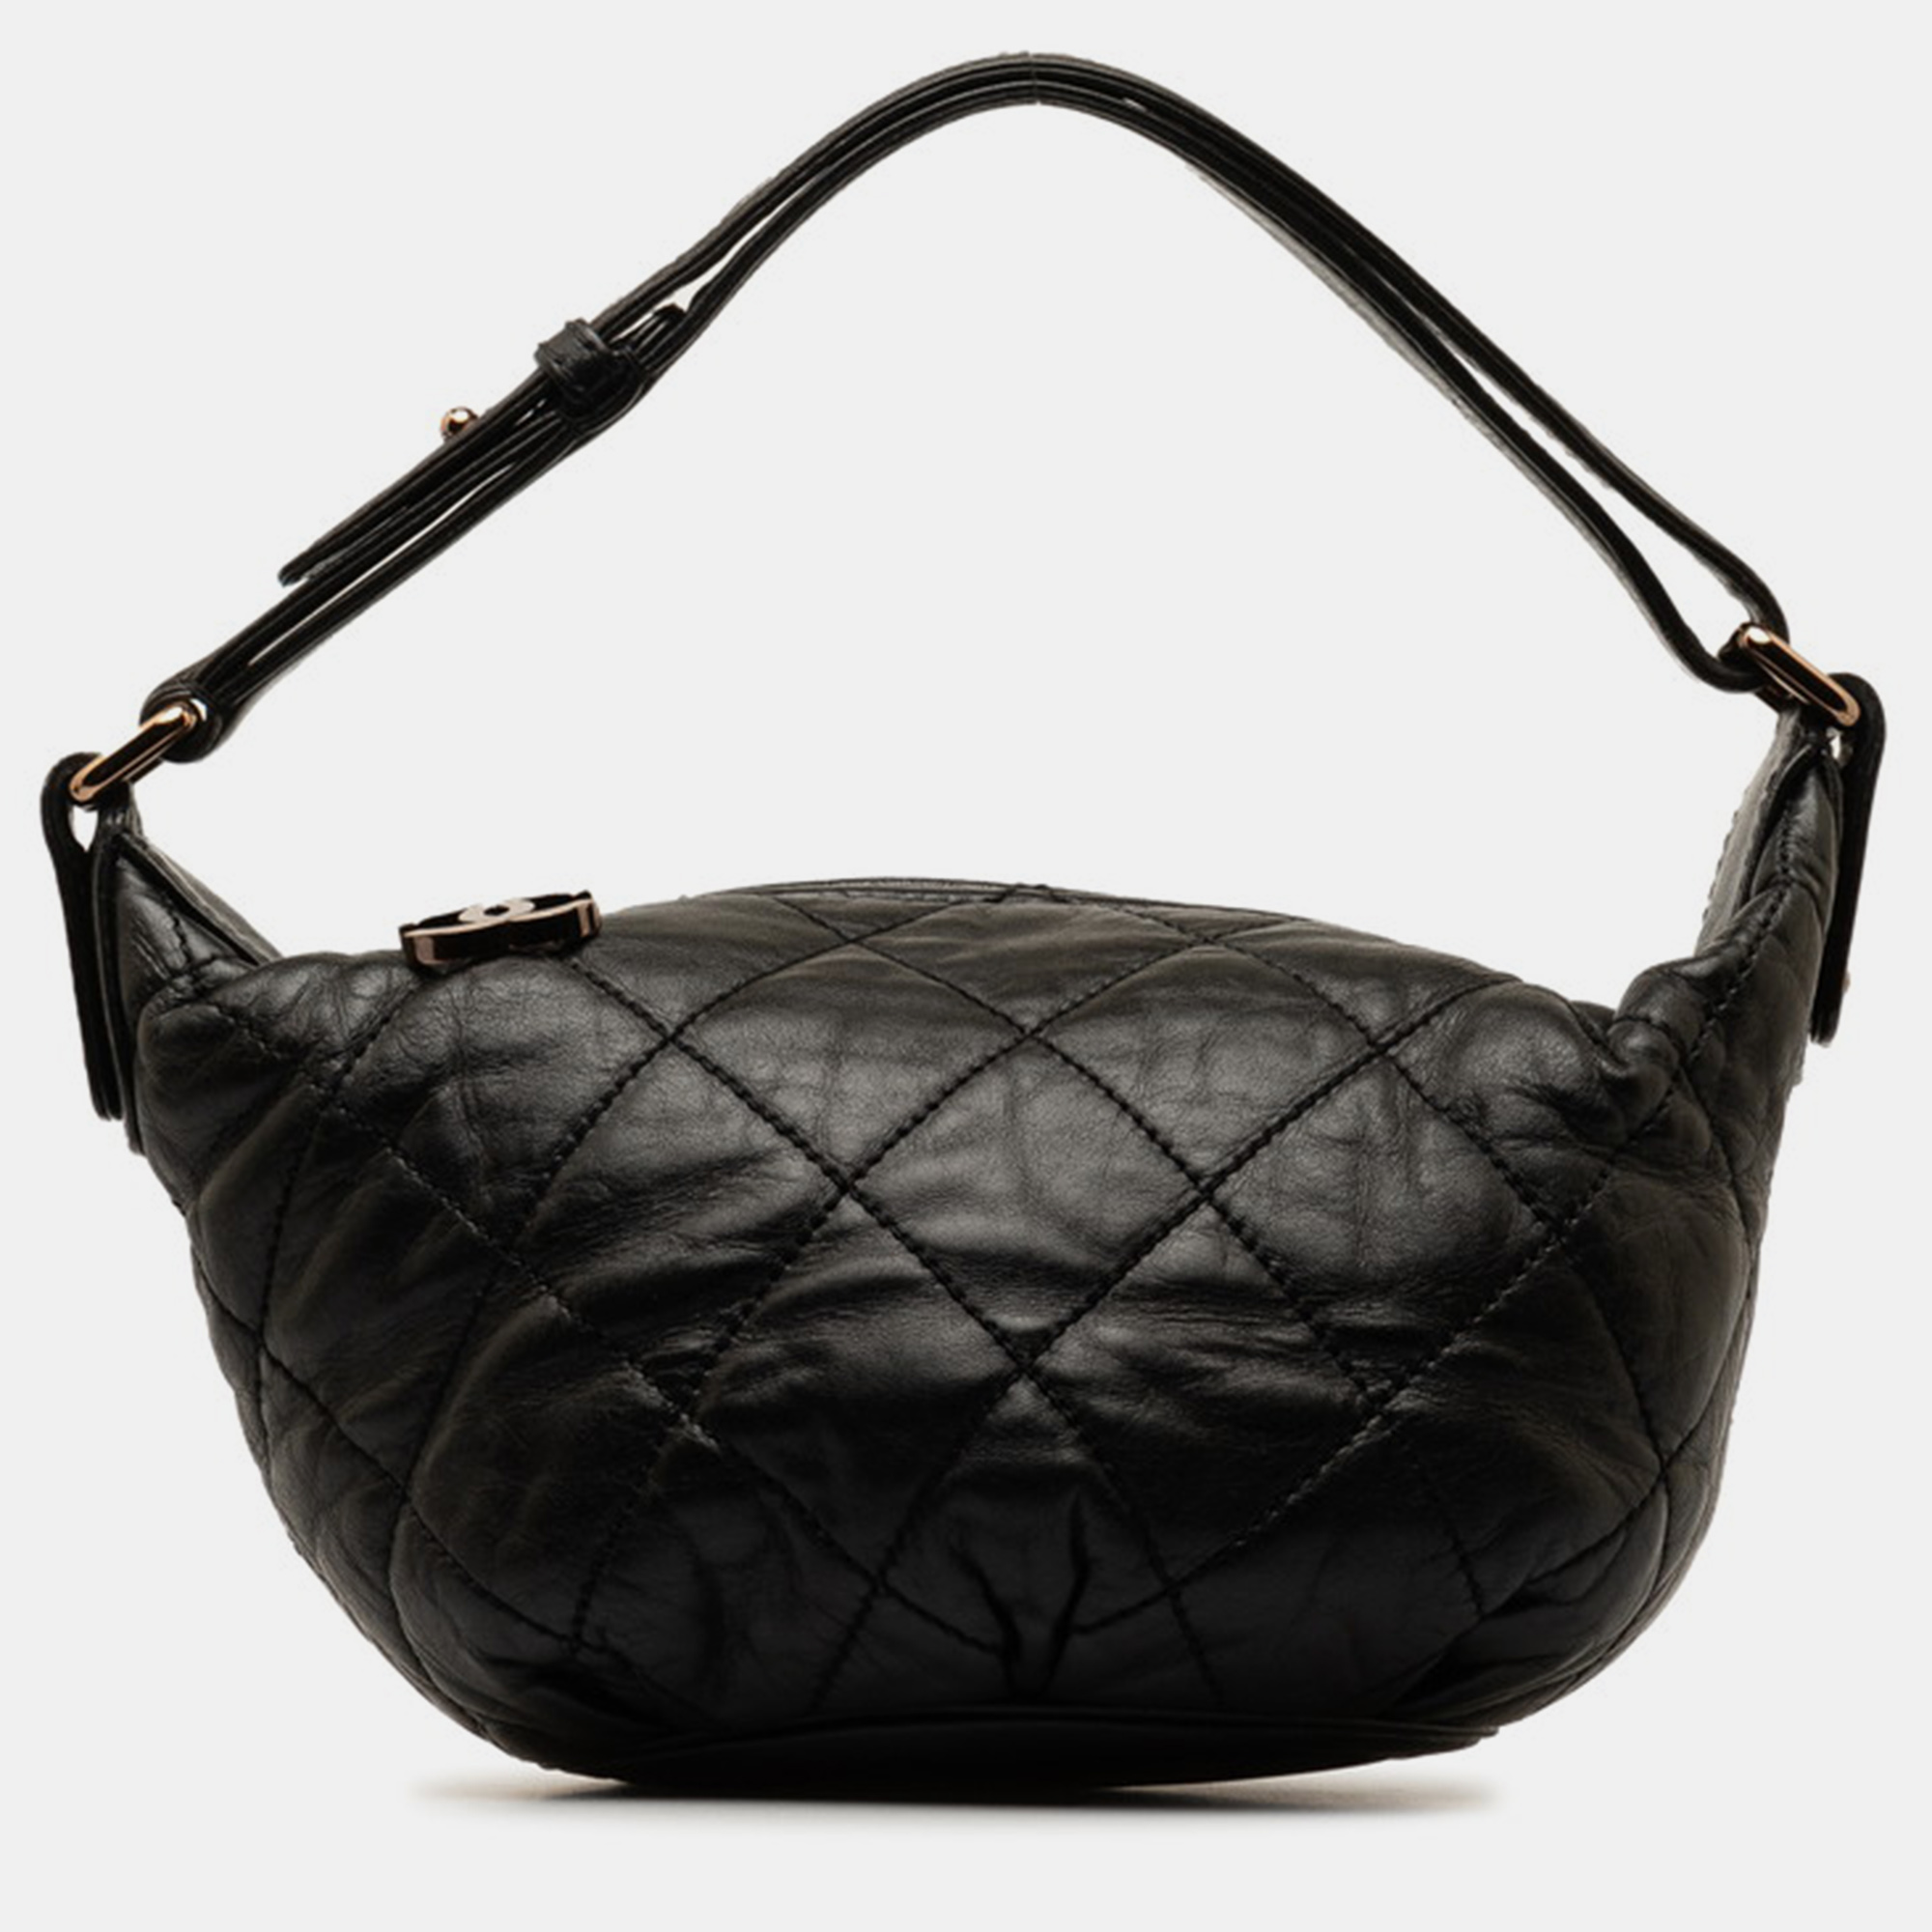 Chanel black lambskin quilted cloudy bundle hobo